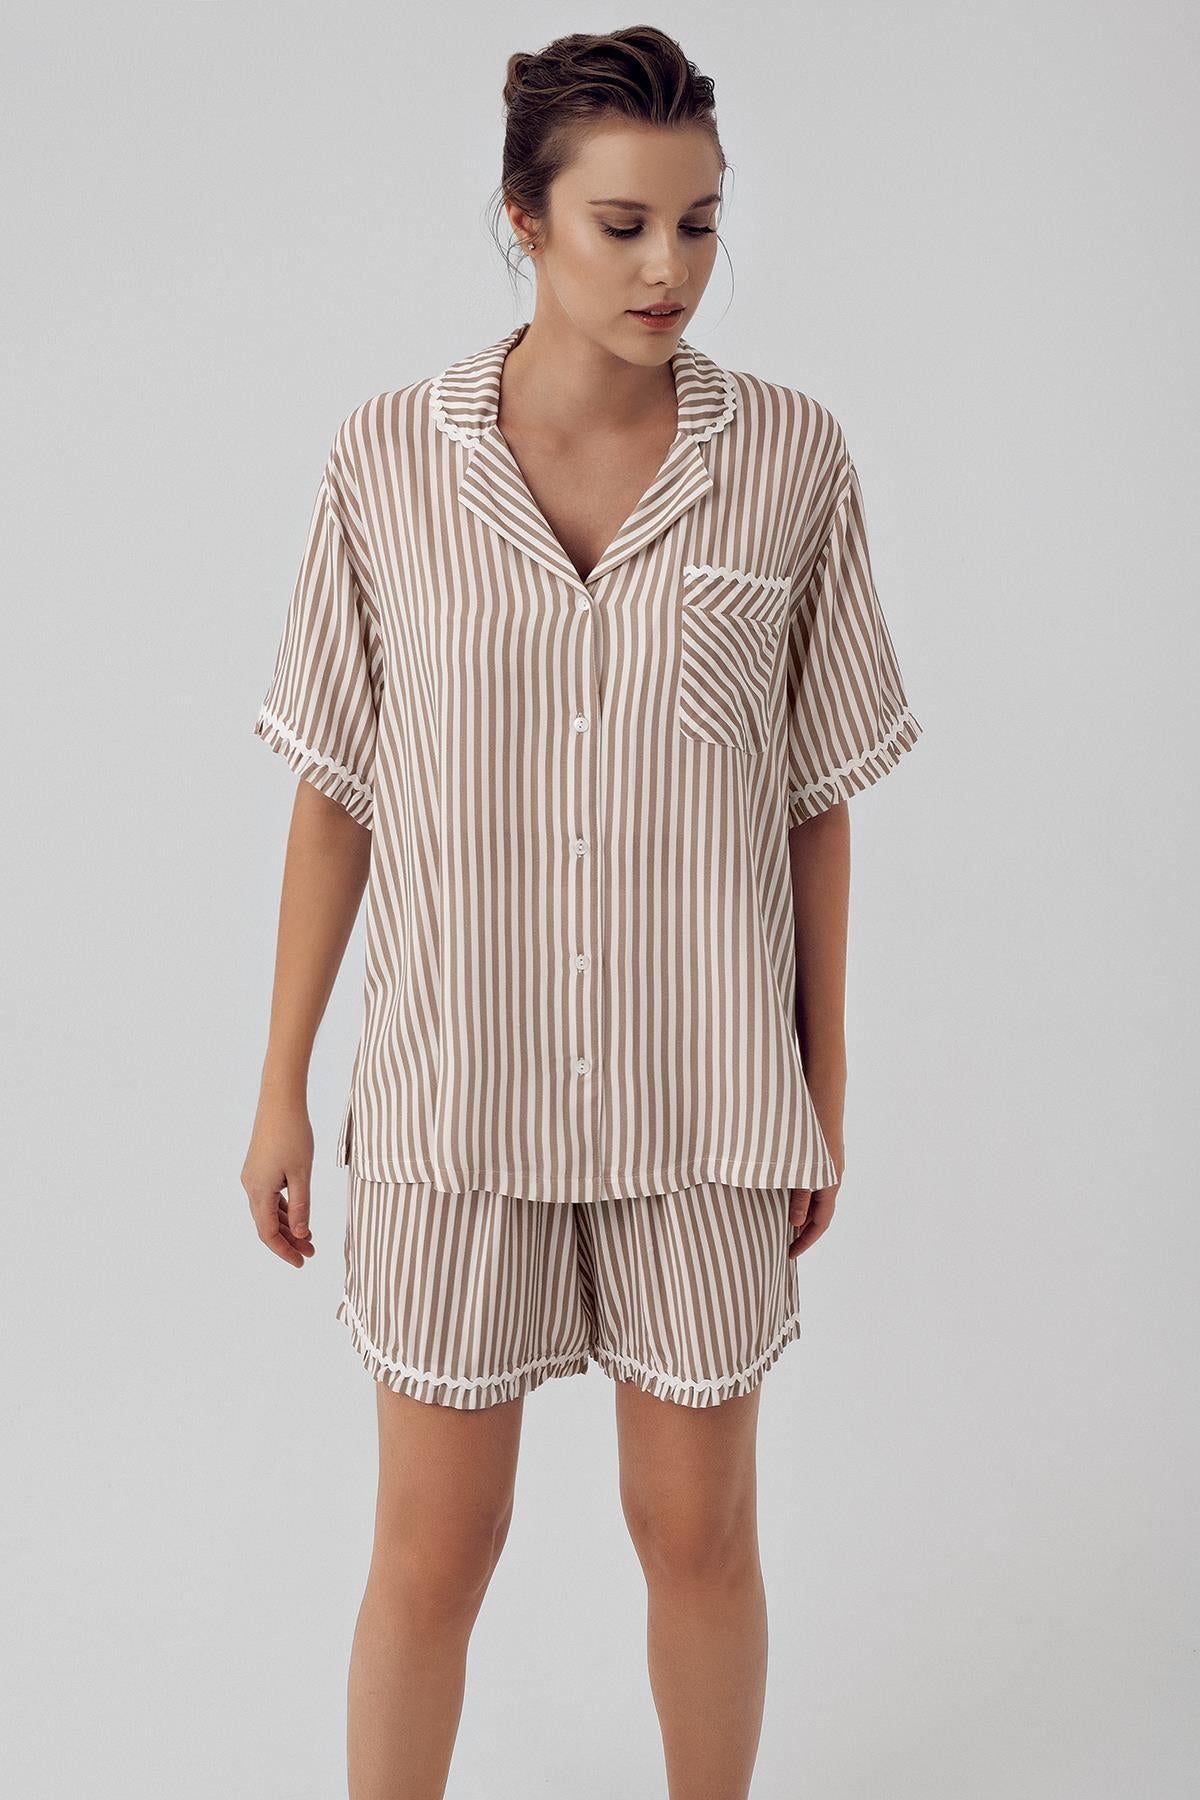 Striped Buttoned Short Sleeve Maternity Pajama Set with Flexible Viscose Shorts 16204